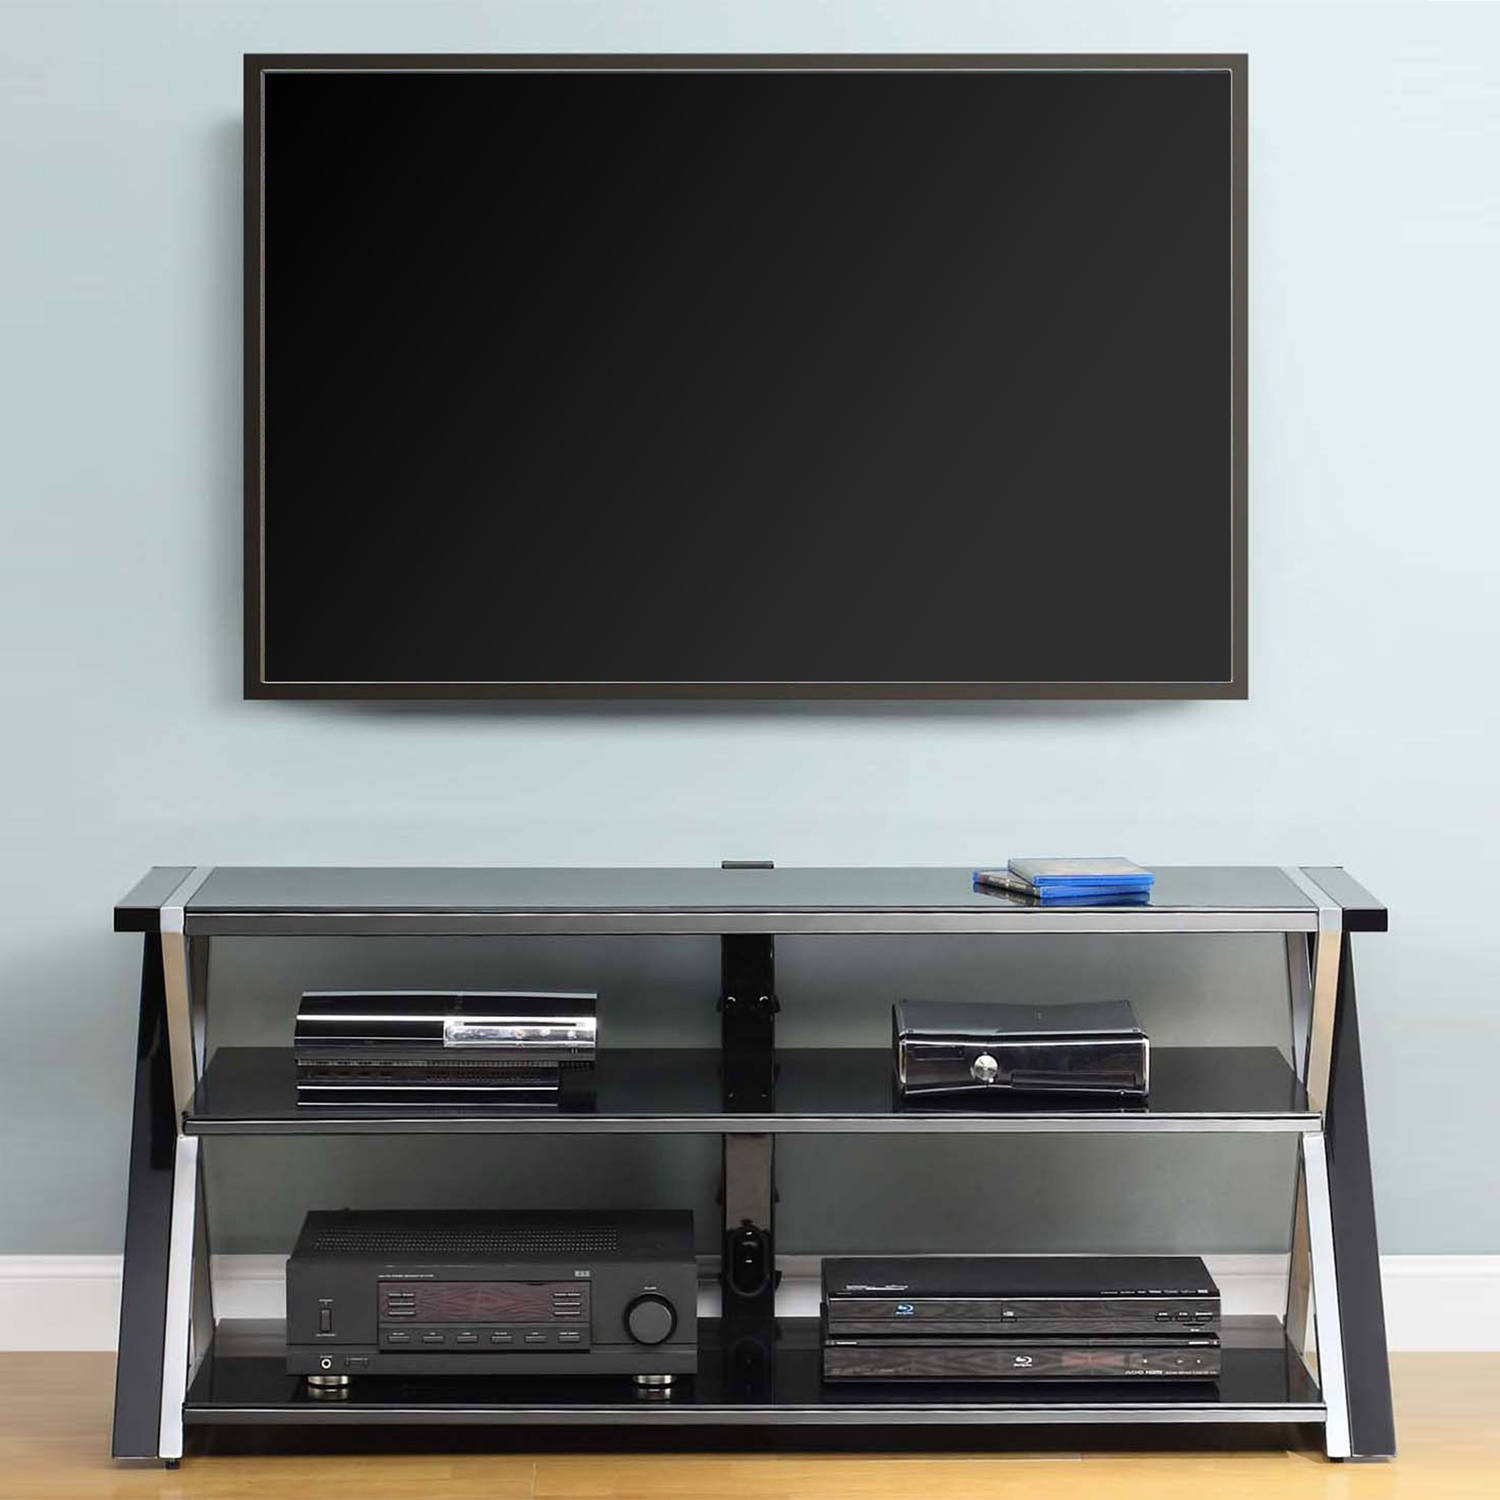 Whalen Furniture Black TV Stand for 60" Flat Panel TVs with Tempered Glass Shelves - image 1 of 4